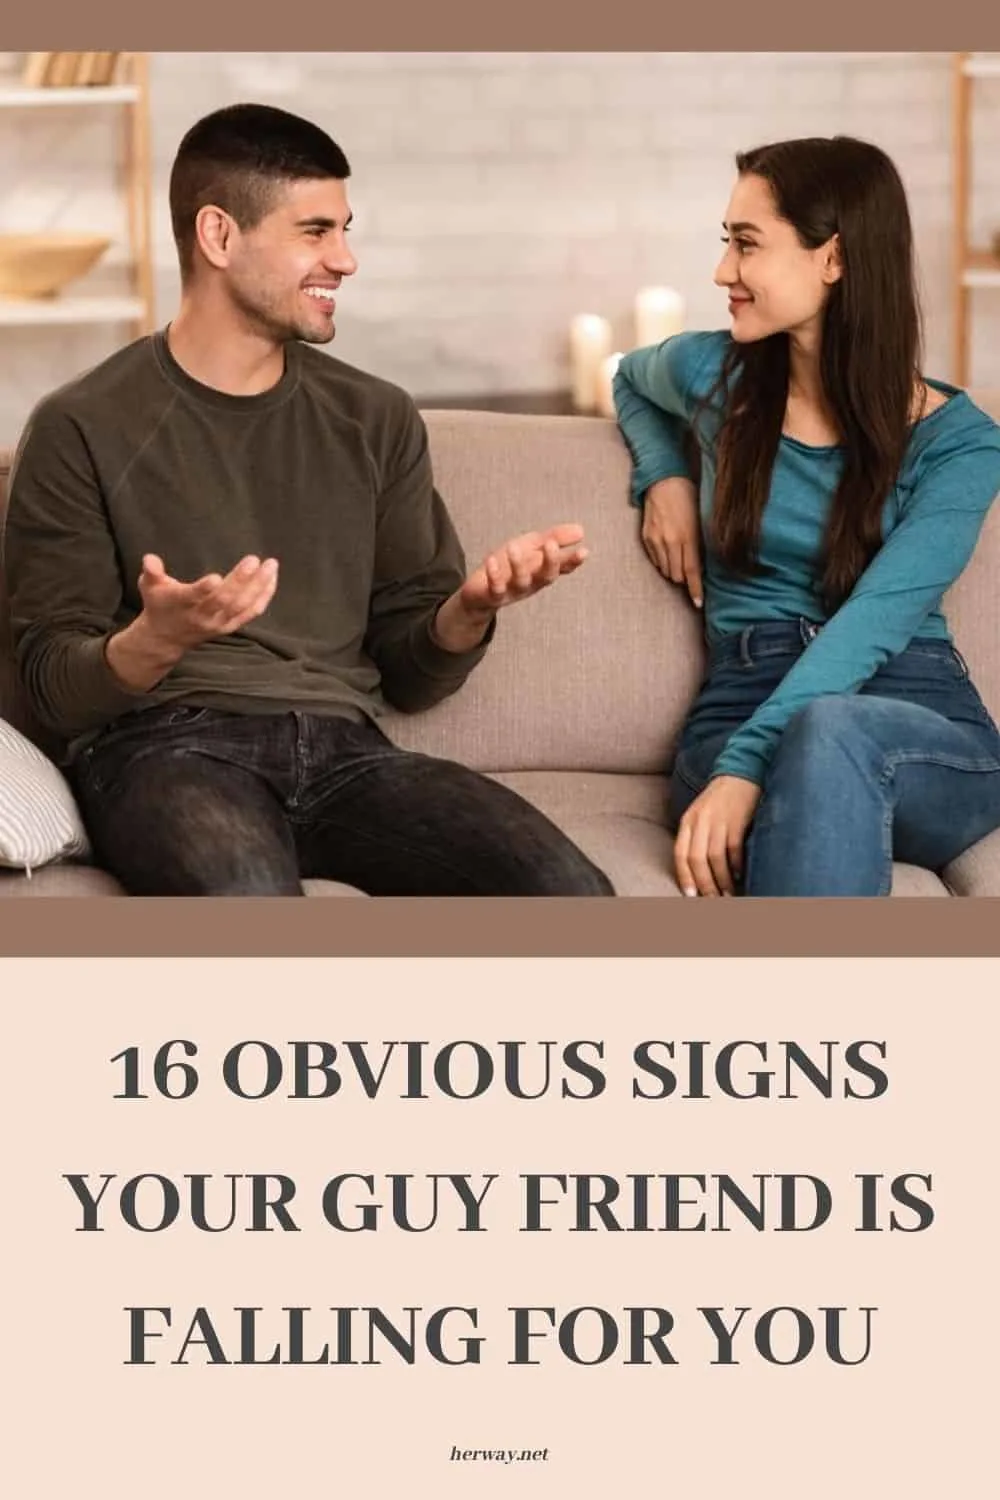 16 Obvious Signs Your Guy Friend Is Falling For You